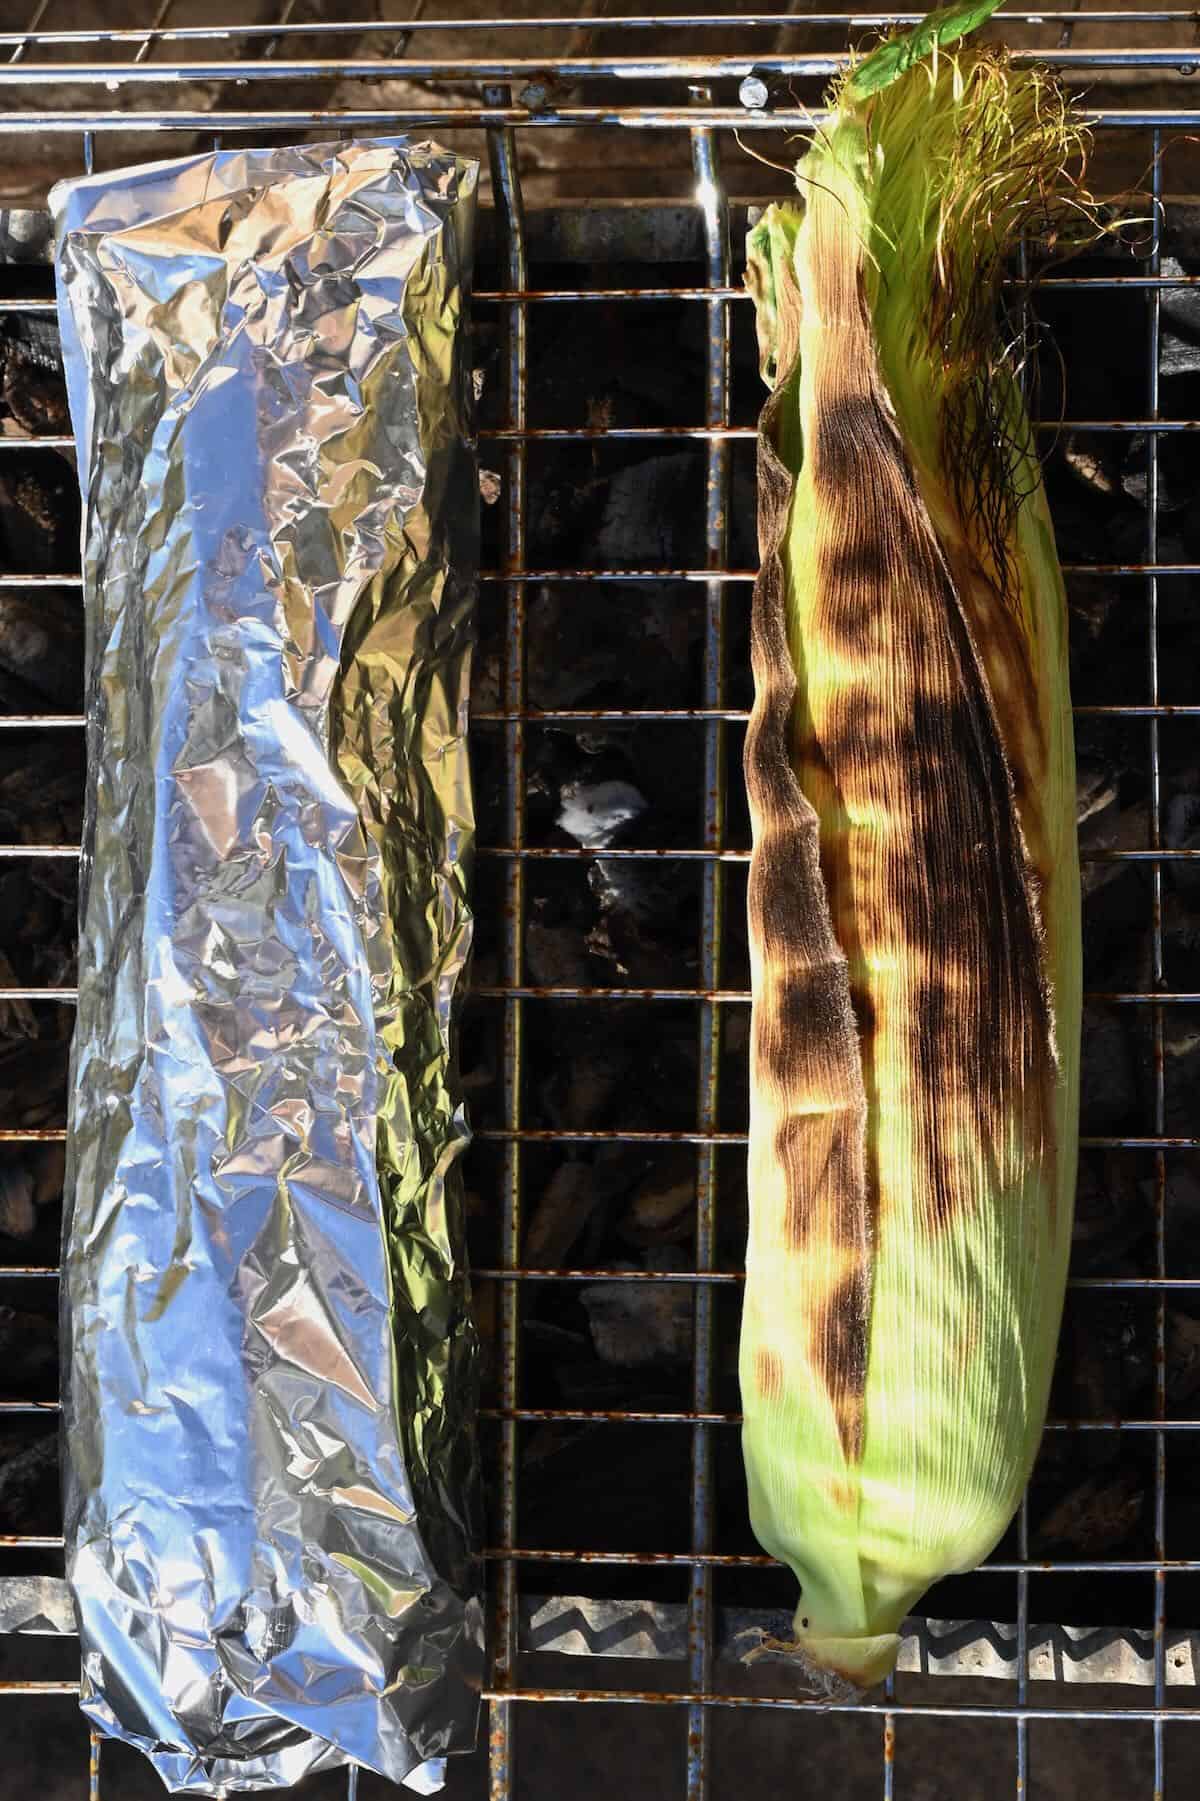 Grilling corn on the cob in the husk